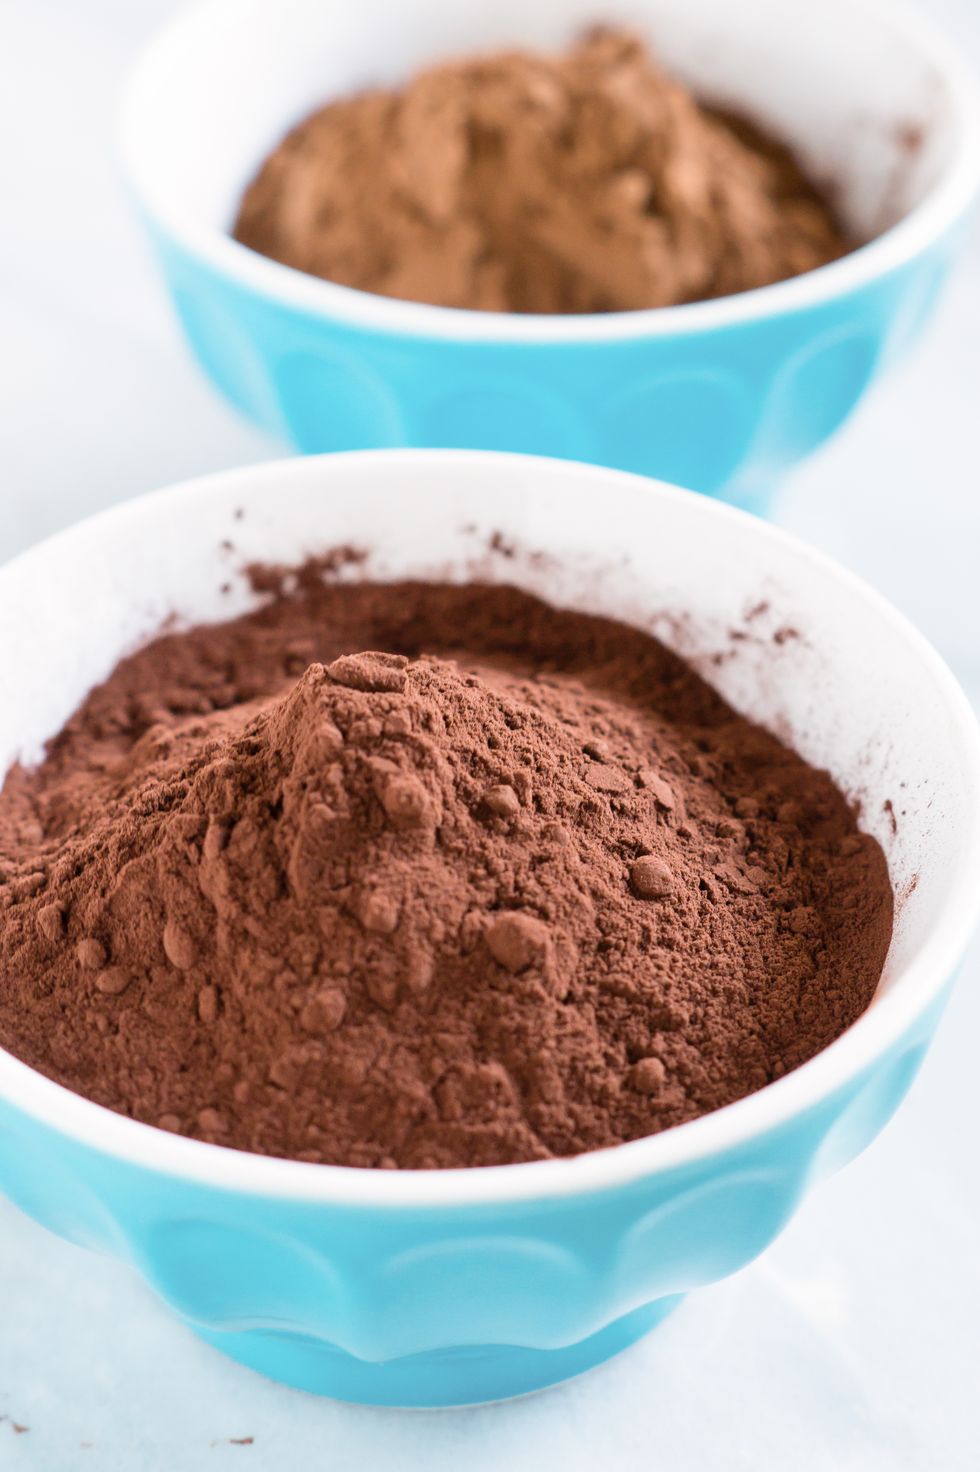 Confused about Cocoa Powder? Here's Your Guide.